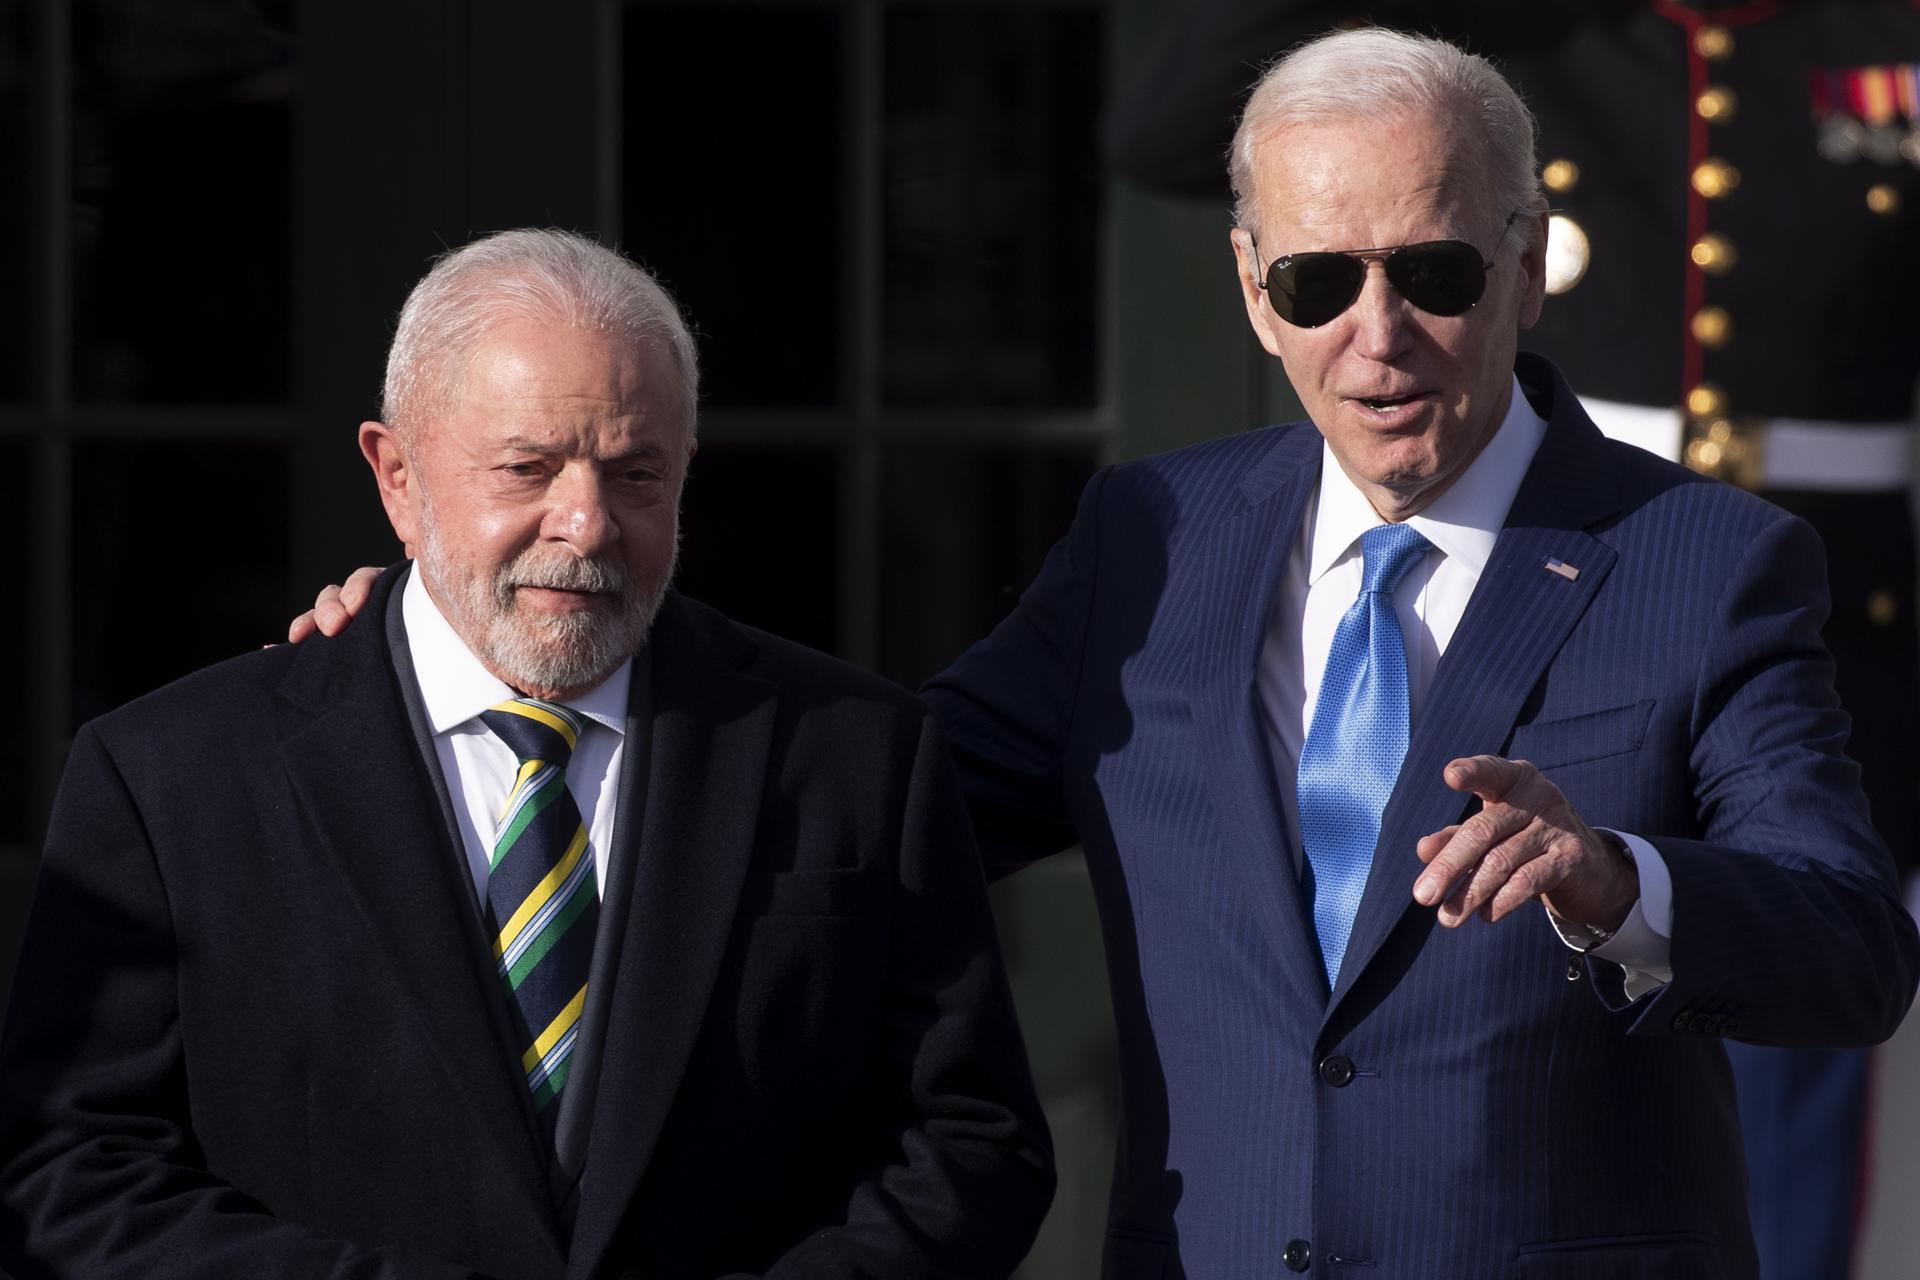 (FILE) US President Joe Biden (R) welcomes President of Brazil Luiz Inacio Lula da Silva (L) at the South Lawn of the White House in Washington, DC, USA, 10 February 2023. The Brazilian president visits his US counterpart to discuss global warming and democracy. EFE/EPA/MICHAEL REYNOLDS